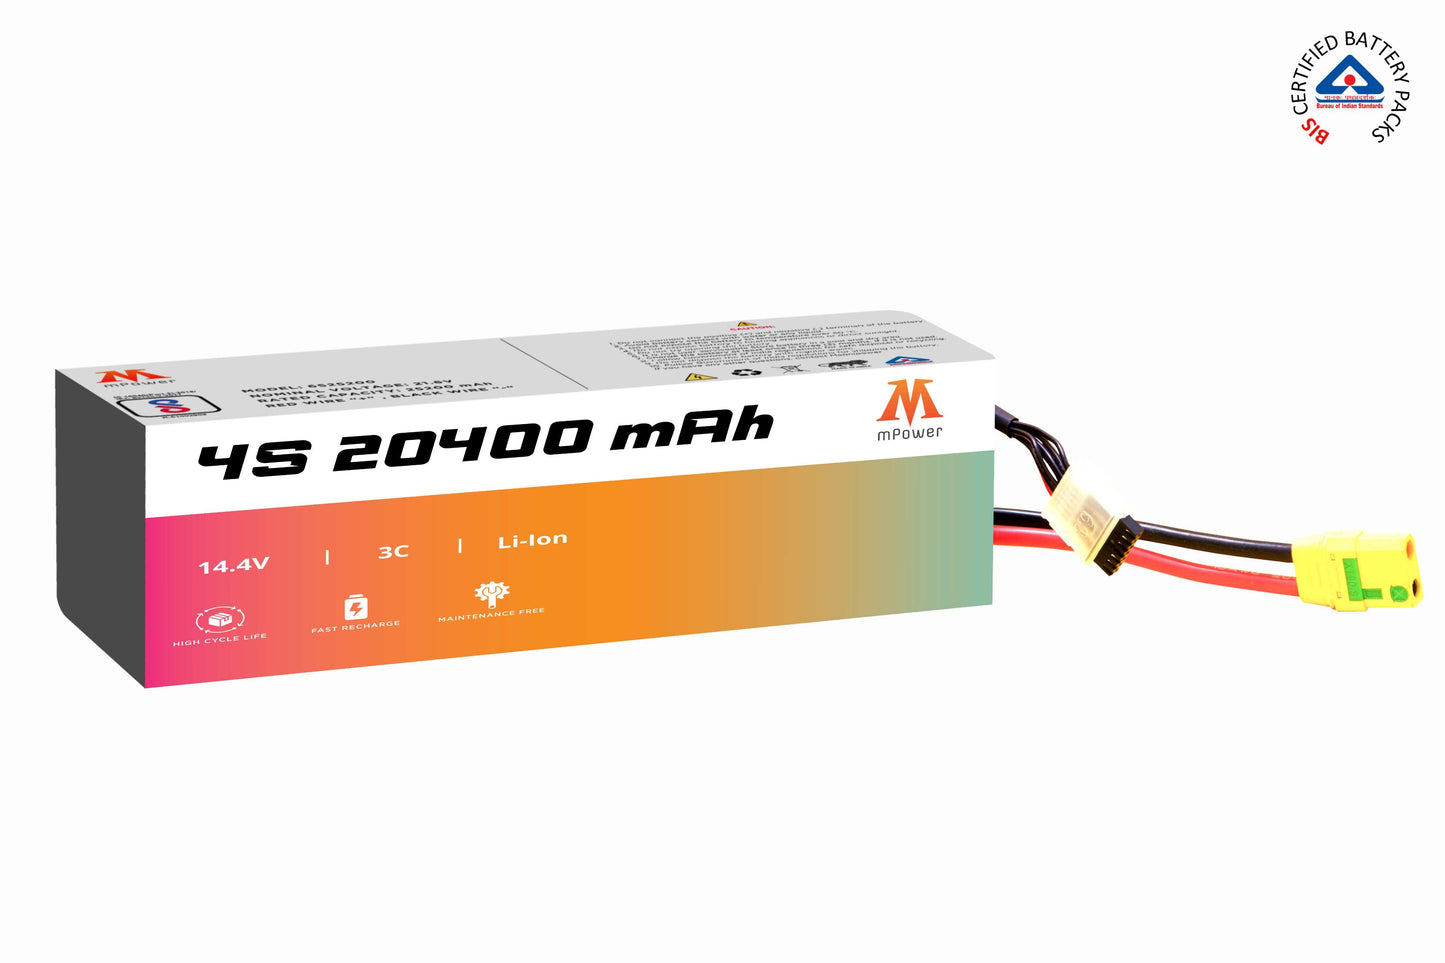 mPower 4S 20400mAh Lithium-Ion Battery for Surveillance Drones